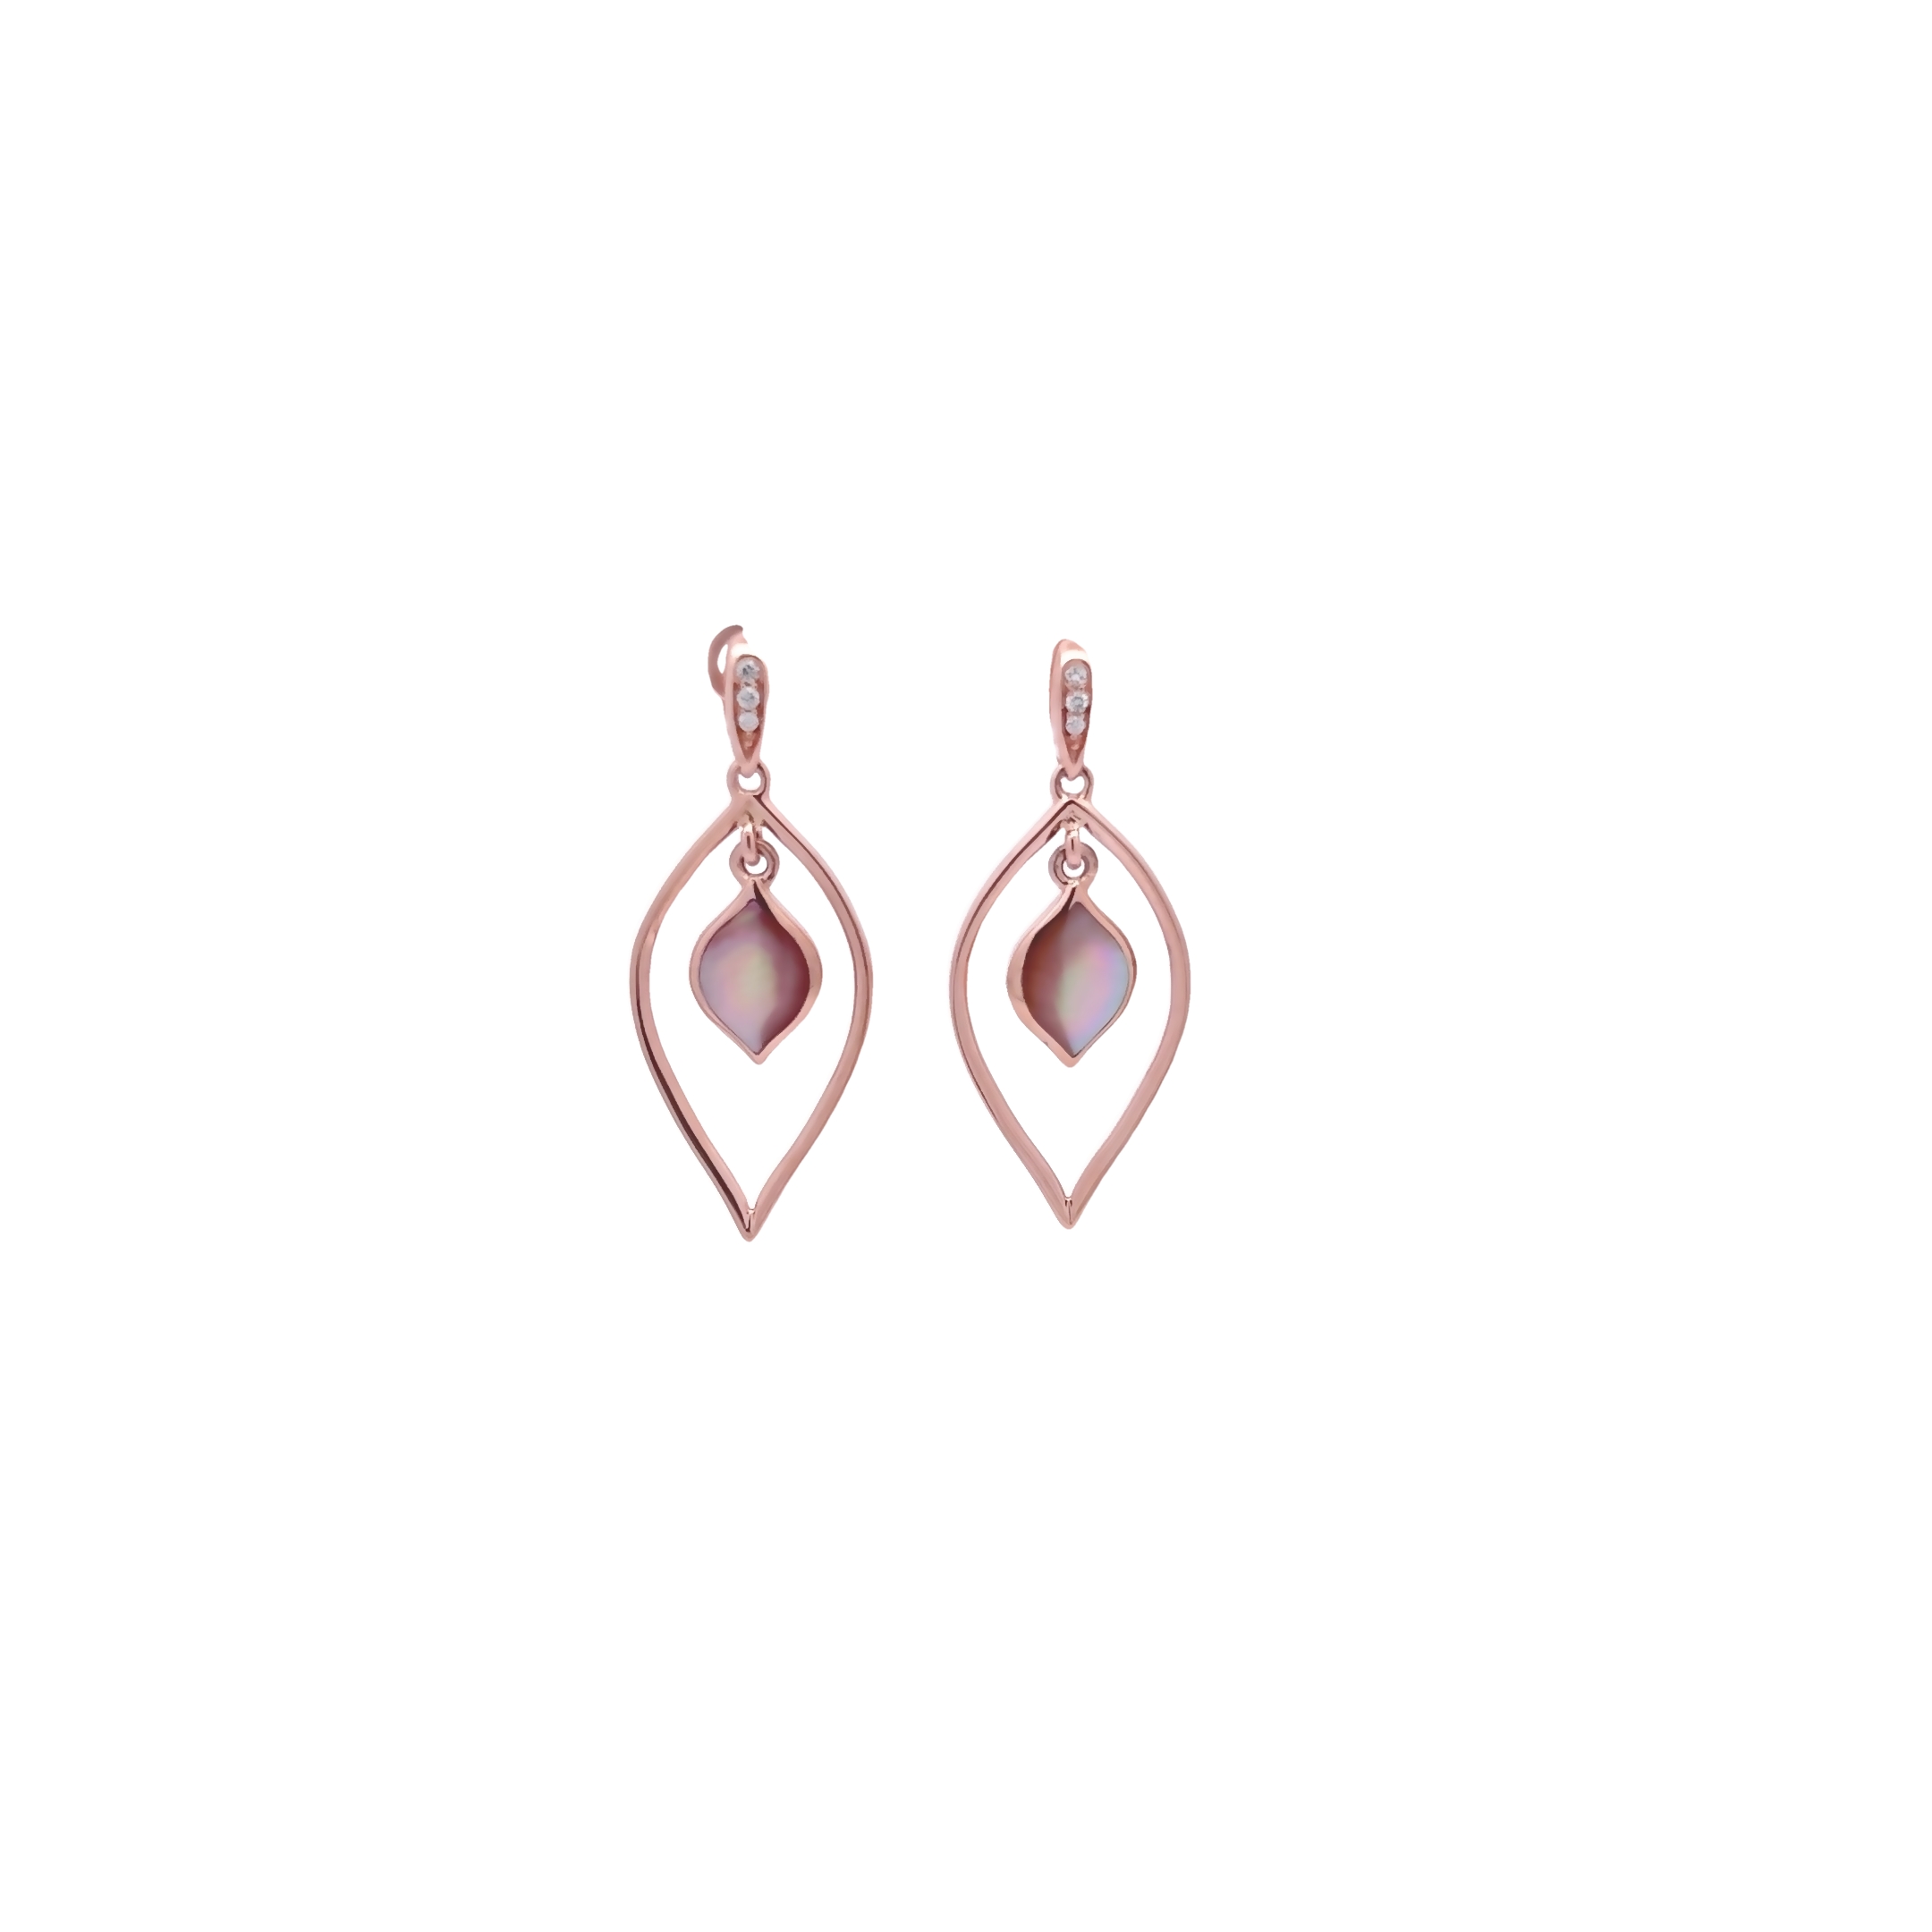 14 Karat rose gold dangle earrings with 6=0.04 total weight round brilliant G VS Diamonds and pink Mother of Pearl inlay.